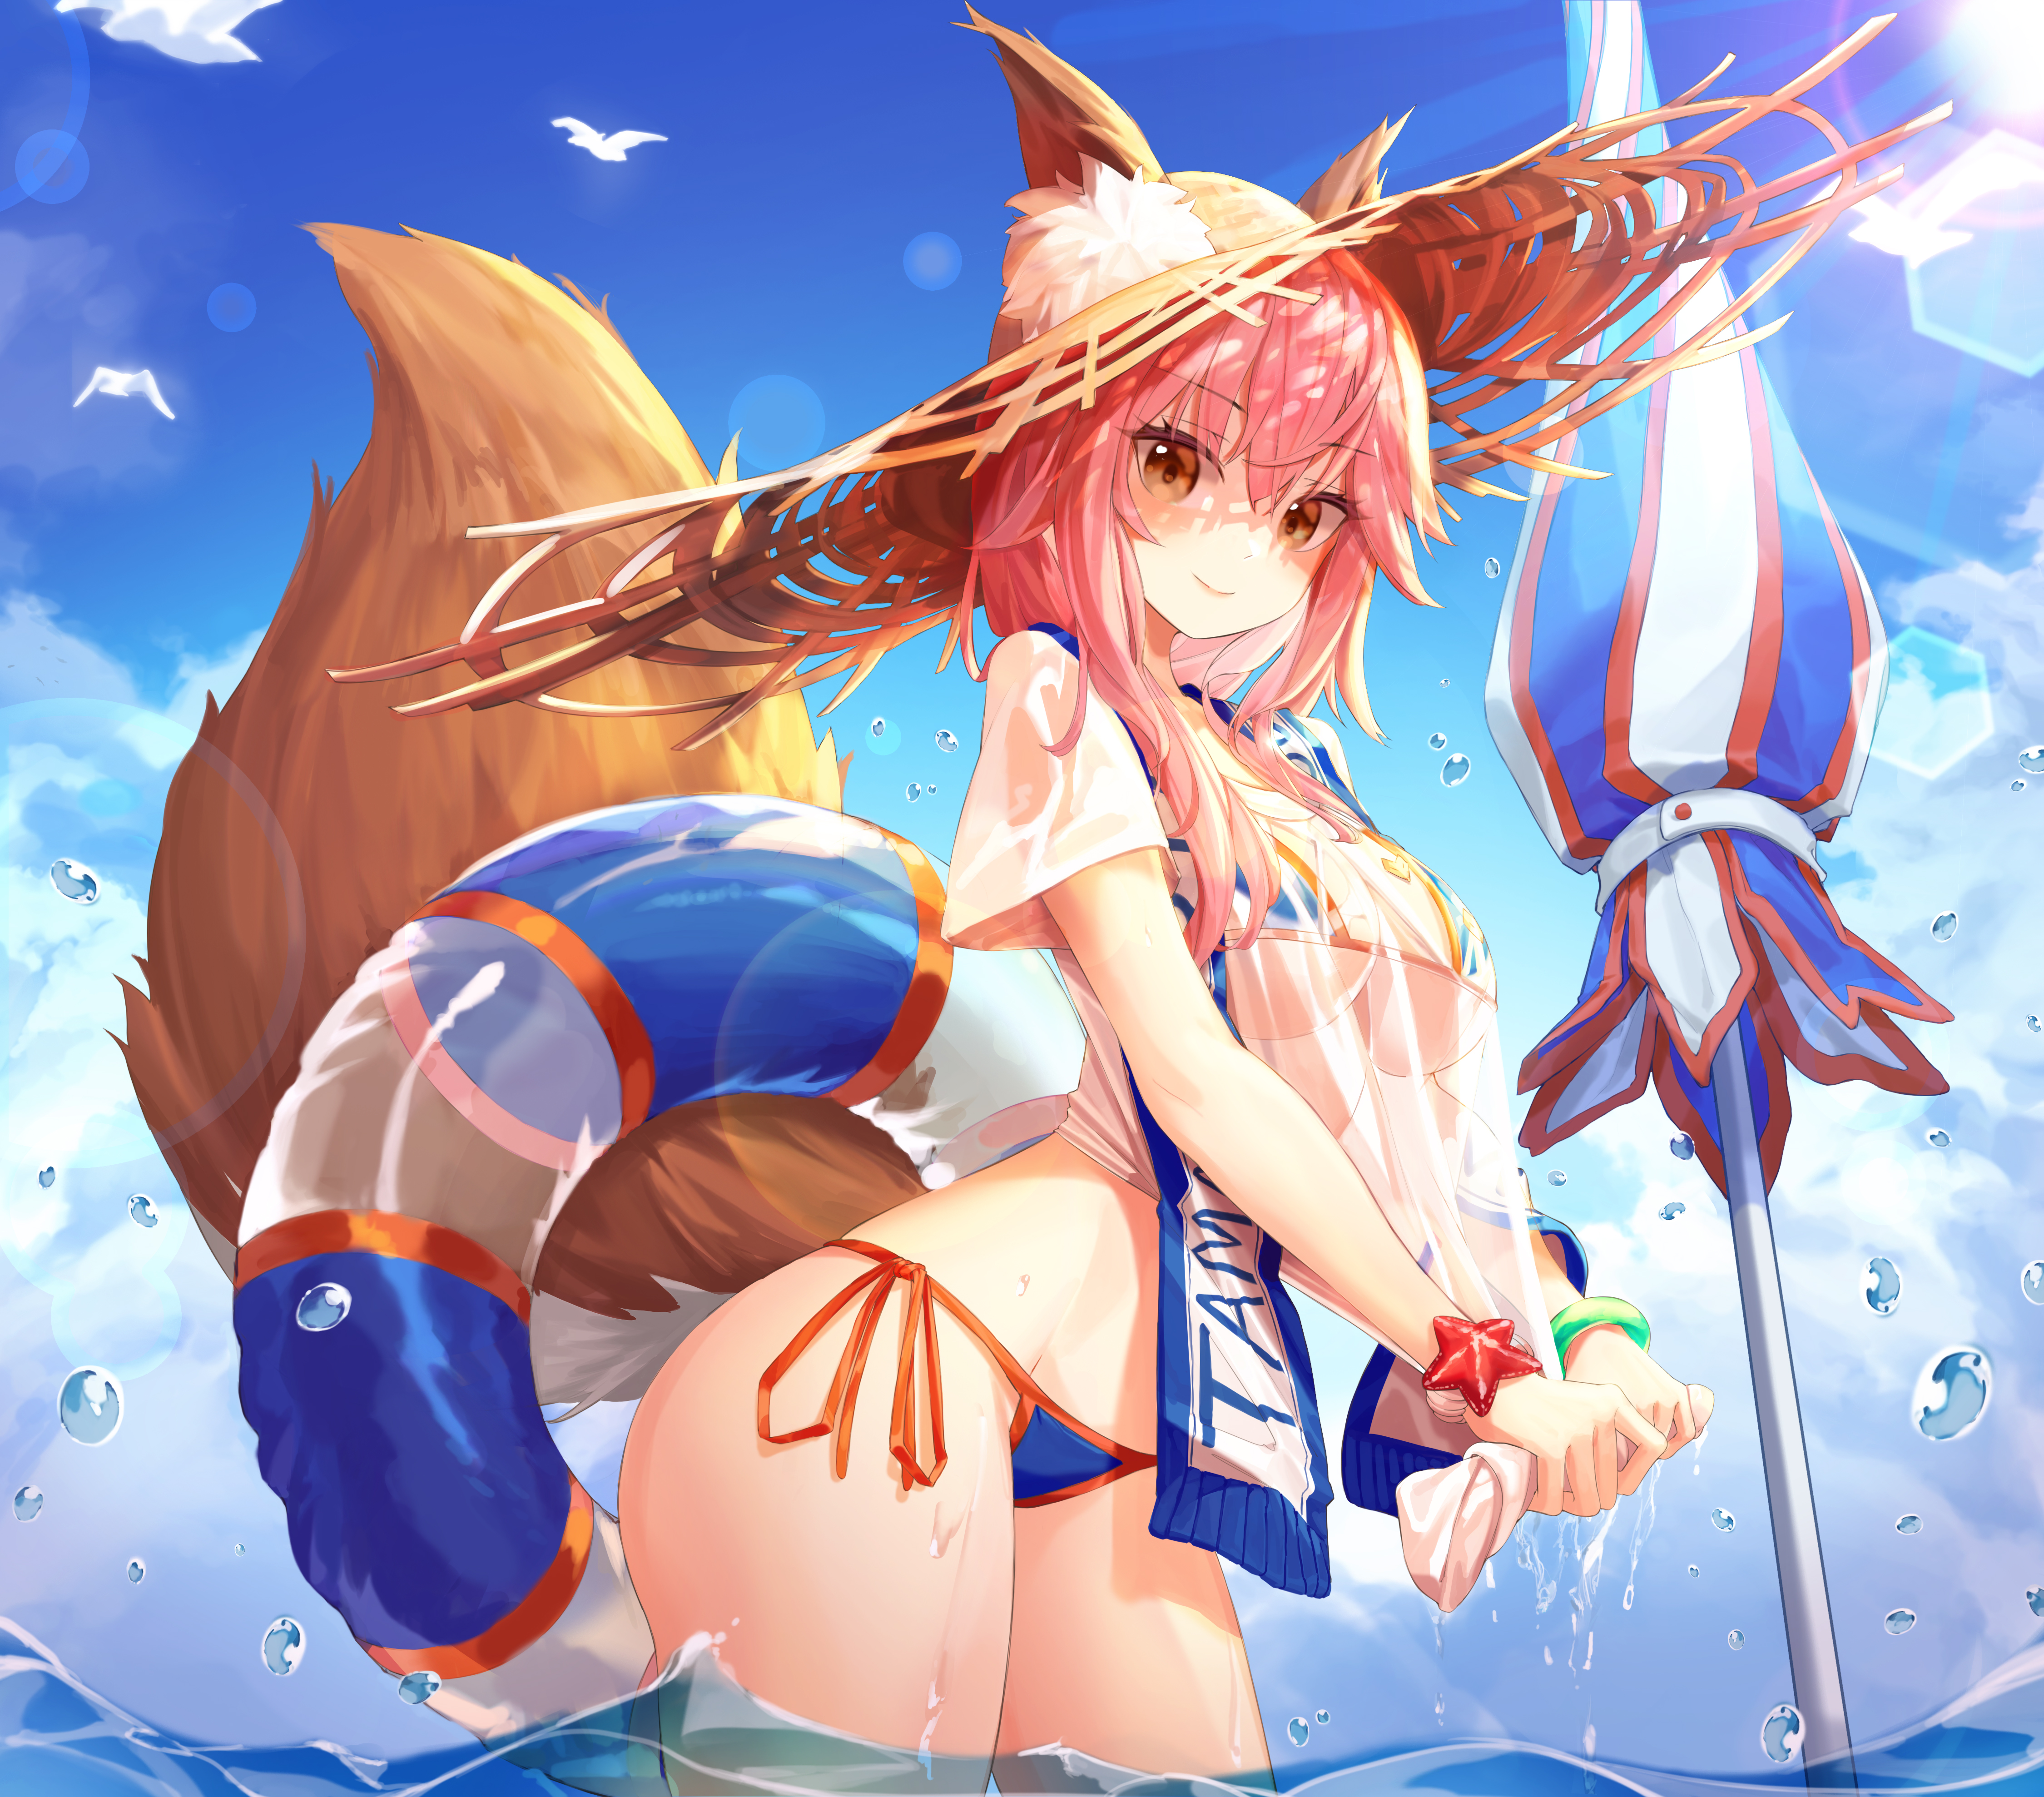 Anime 4500x3956 Tamamo no Mae (fate/grand order) Fate/Grand Order Fate series anime anime girls animal ears fantasy girl straw hat looking at viewer smiling bikini swimwear T-shirt see-through clothing wet clothing water drops in water tail sky birds sun rays lens flare summer floater artwork drawing digital art illustration 2D fan art